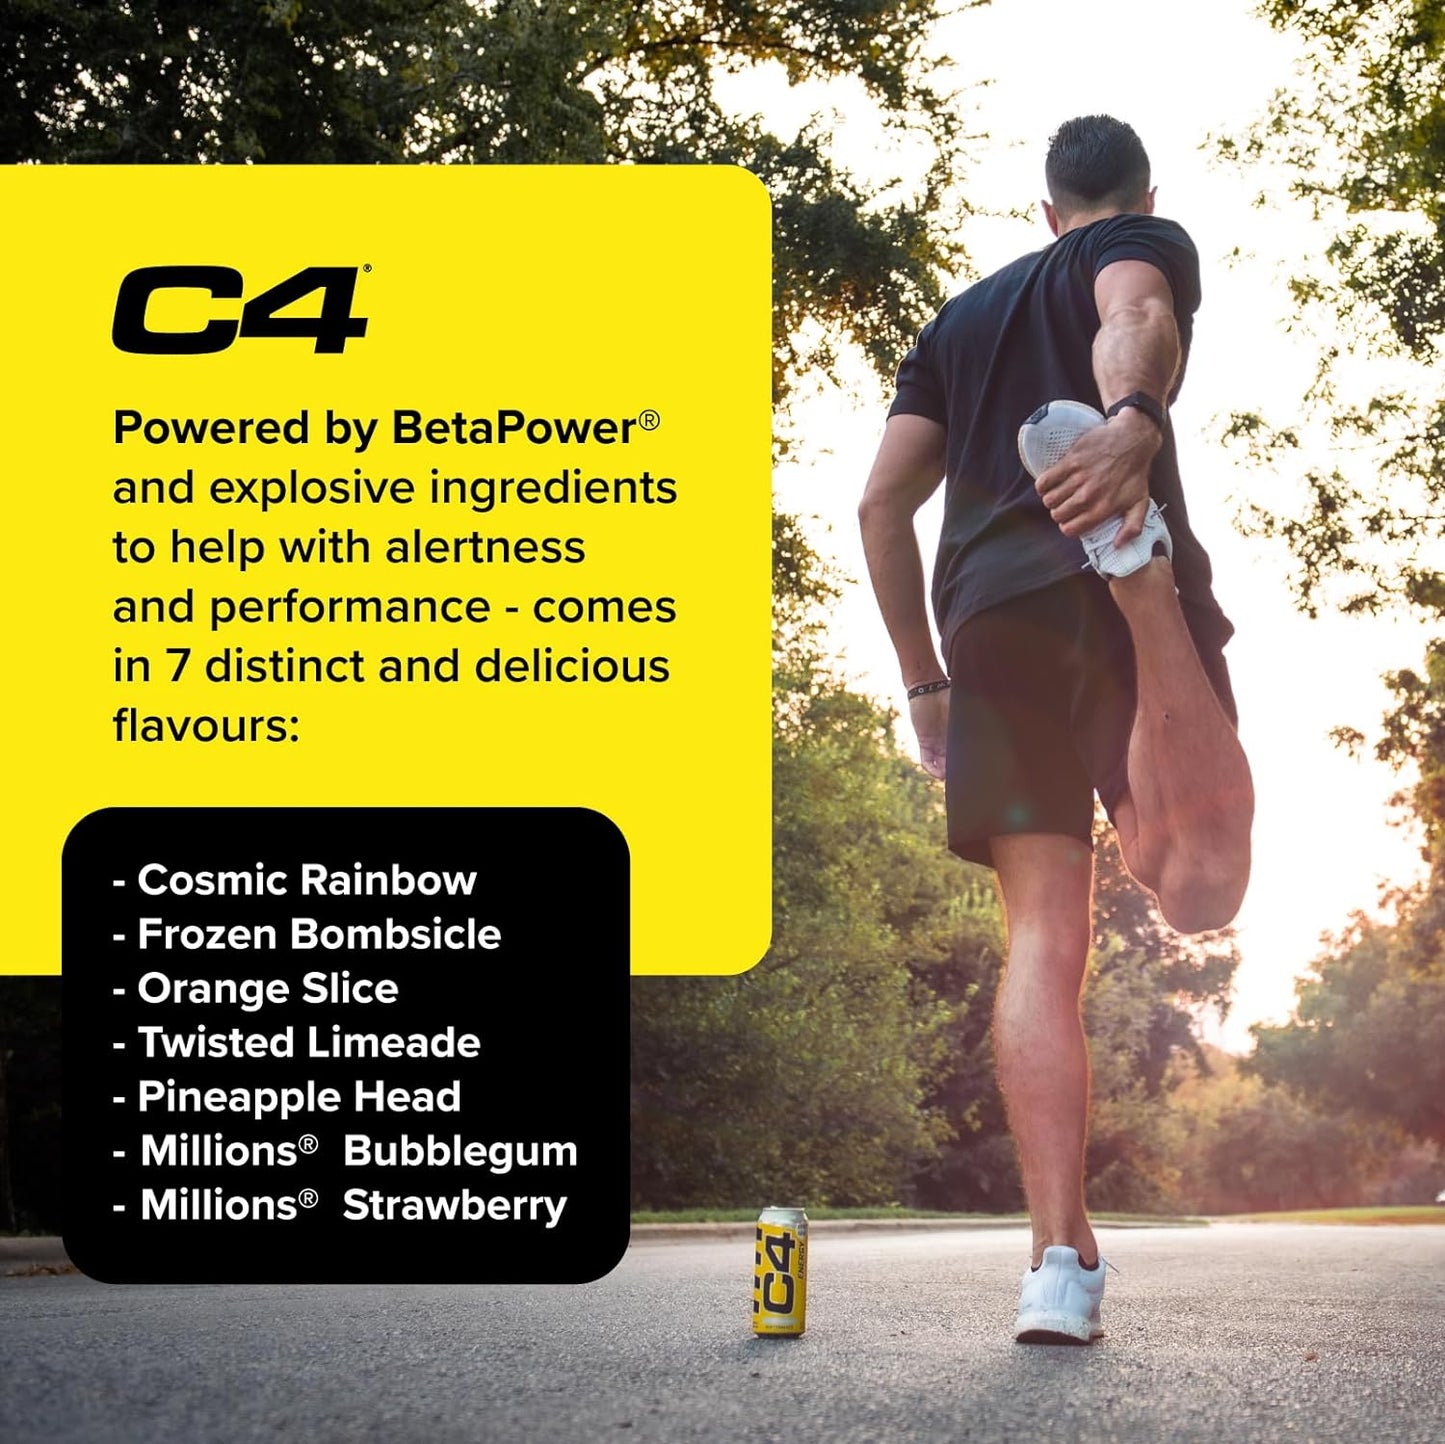 Cellucor C4 Energy Twisted Limeade - 12 Cans